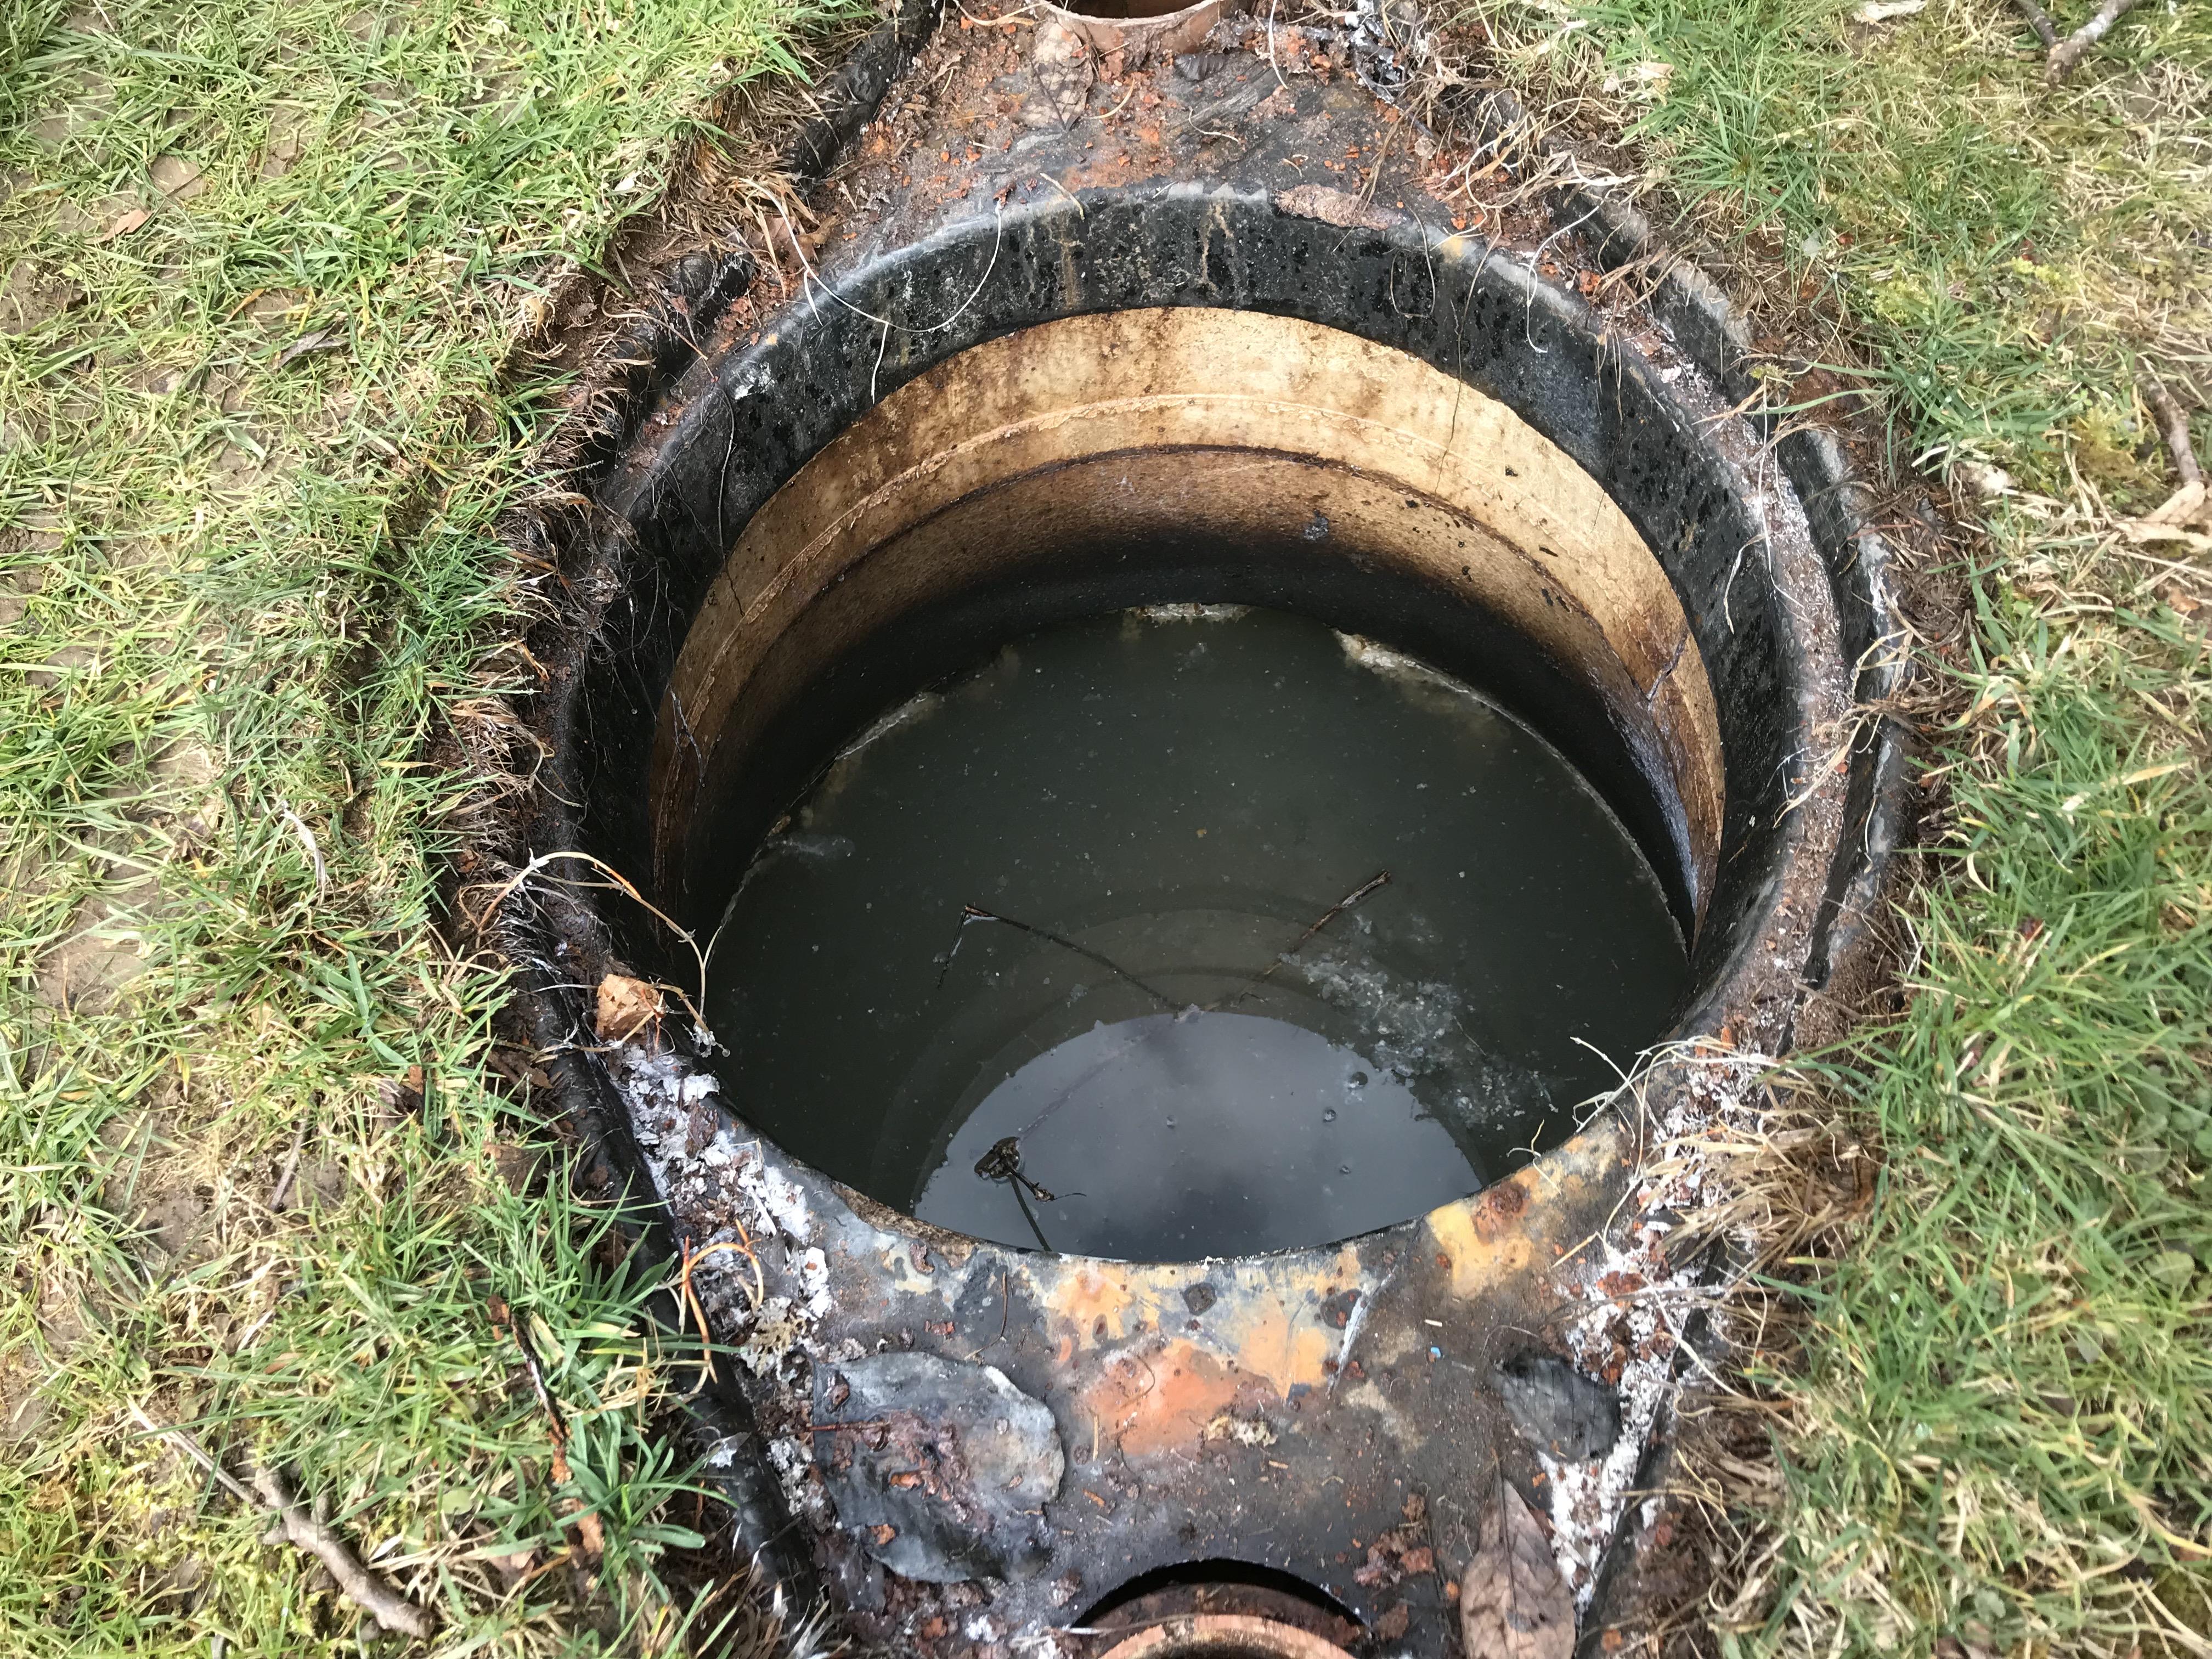 Septic tank responsibility as the operator. Maintenance and installations by ASL Limited